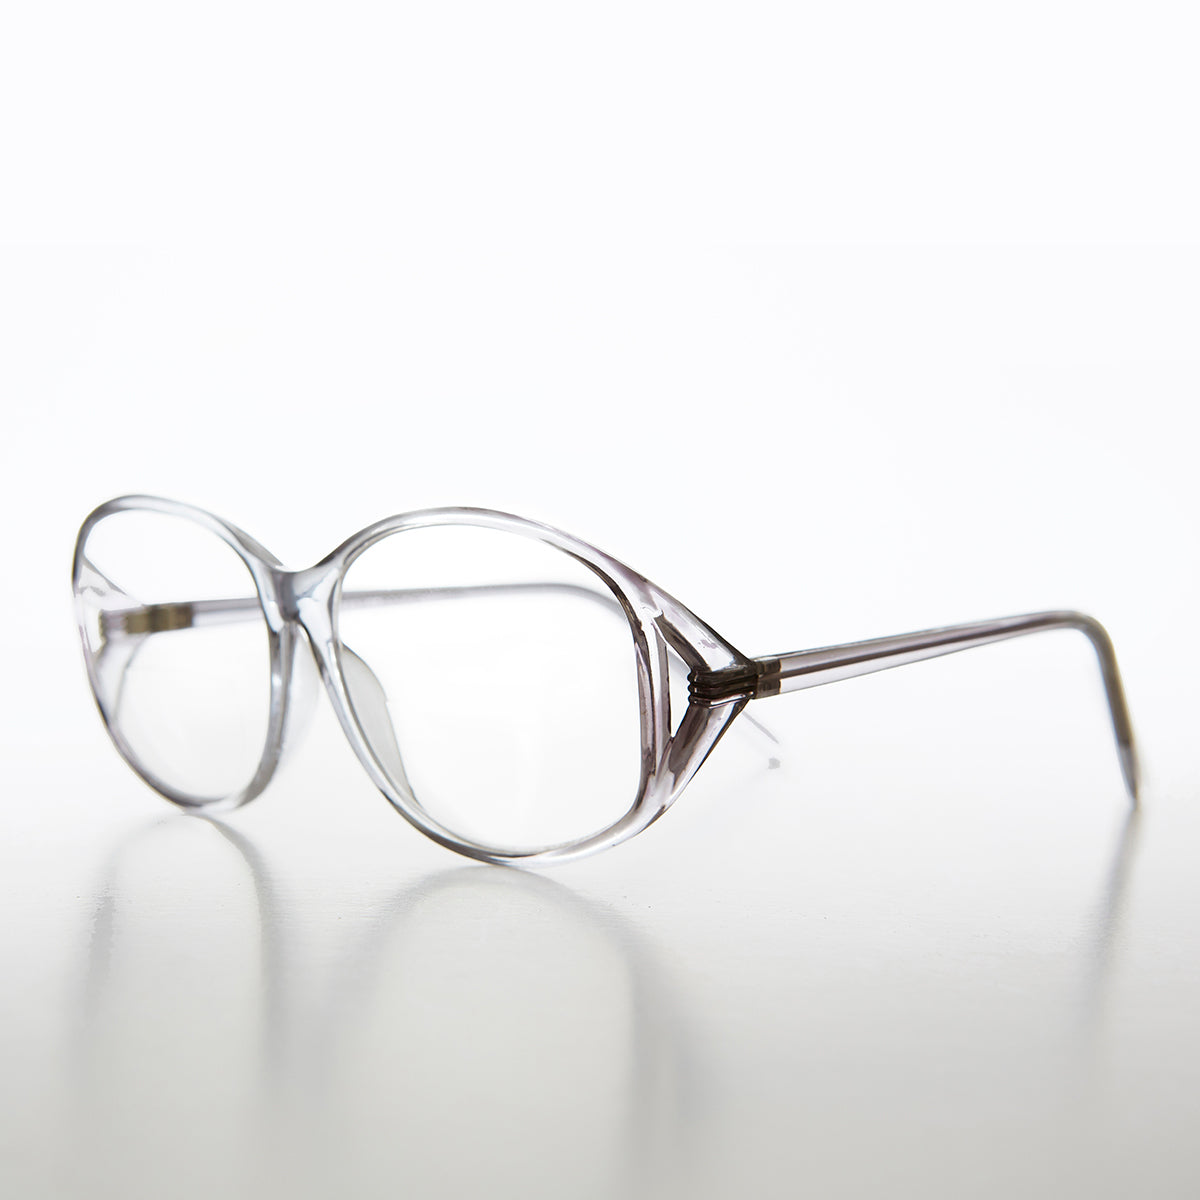 Old Fashioned Round Reading Glasses